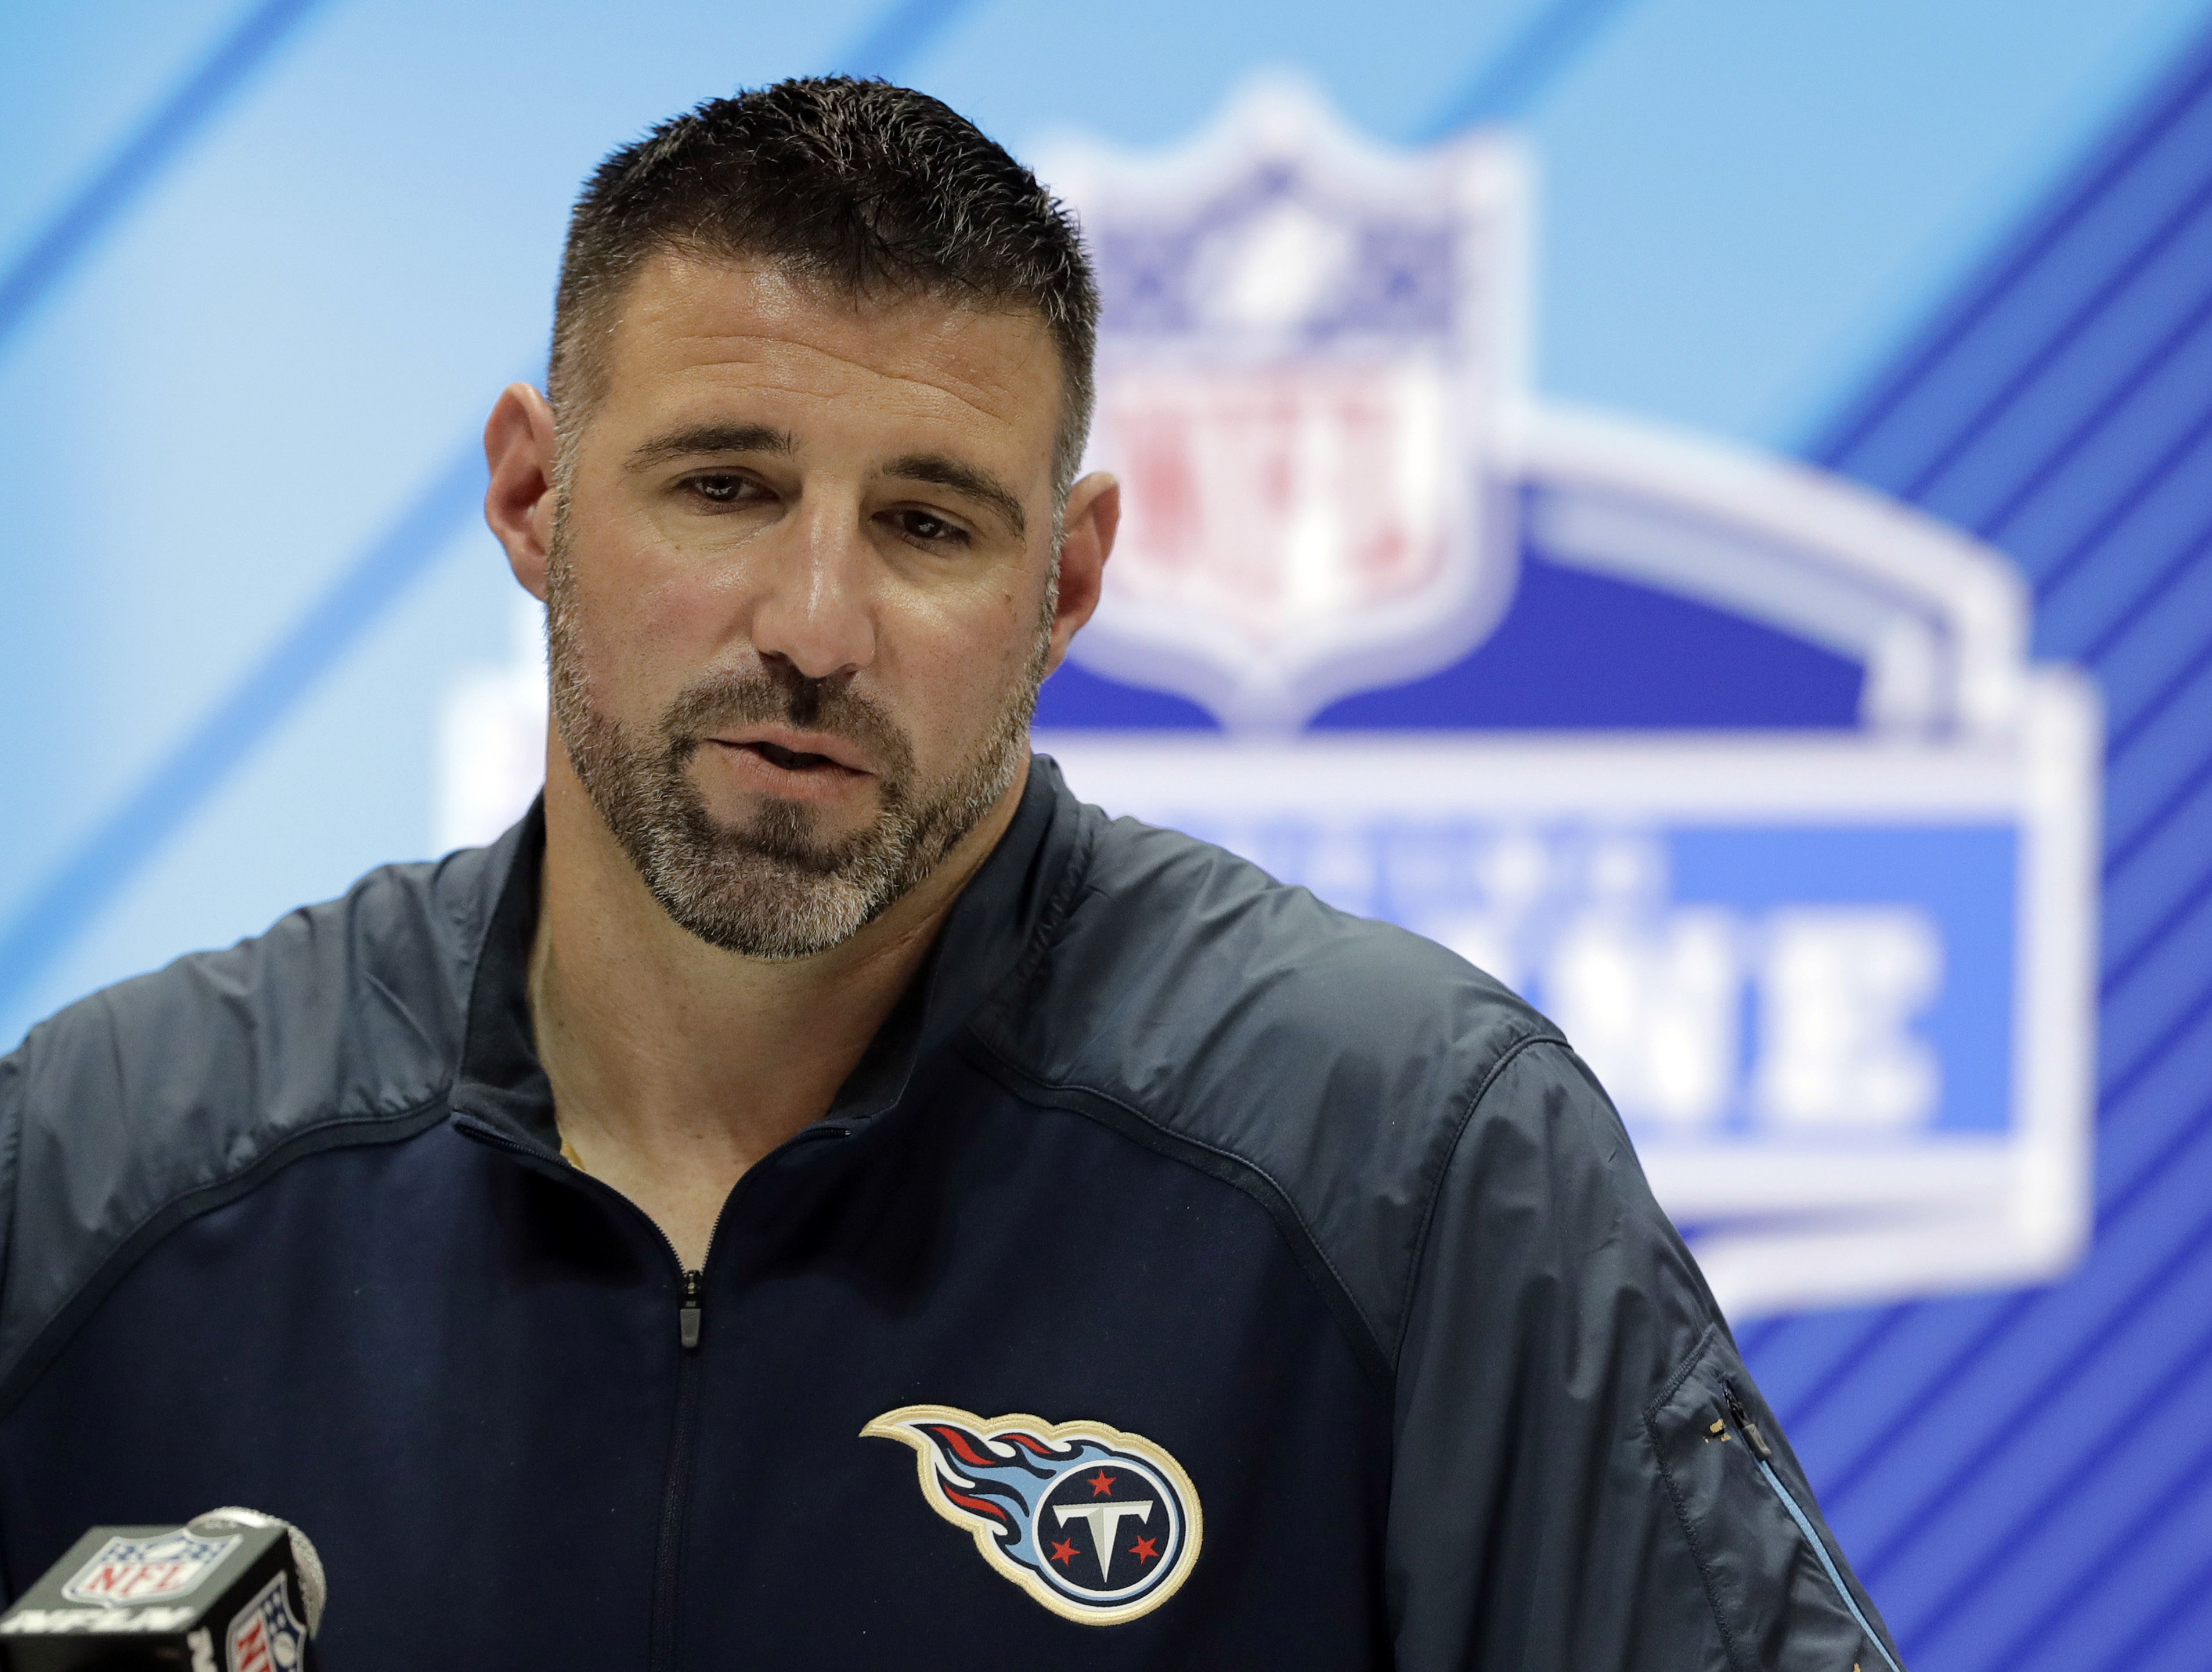 New Titans coach Mike Vrabel explains what he learned coaching at Ohio State